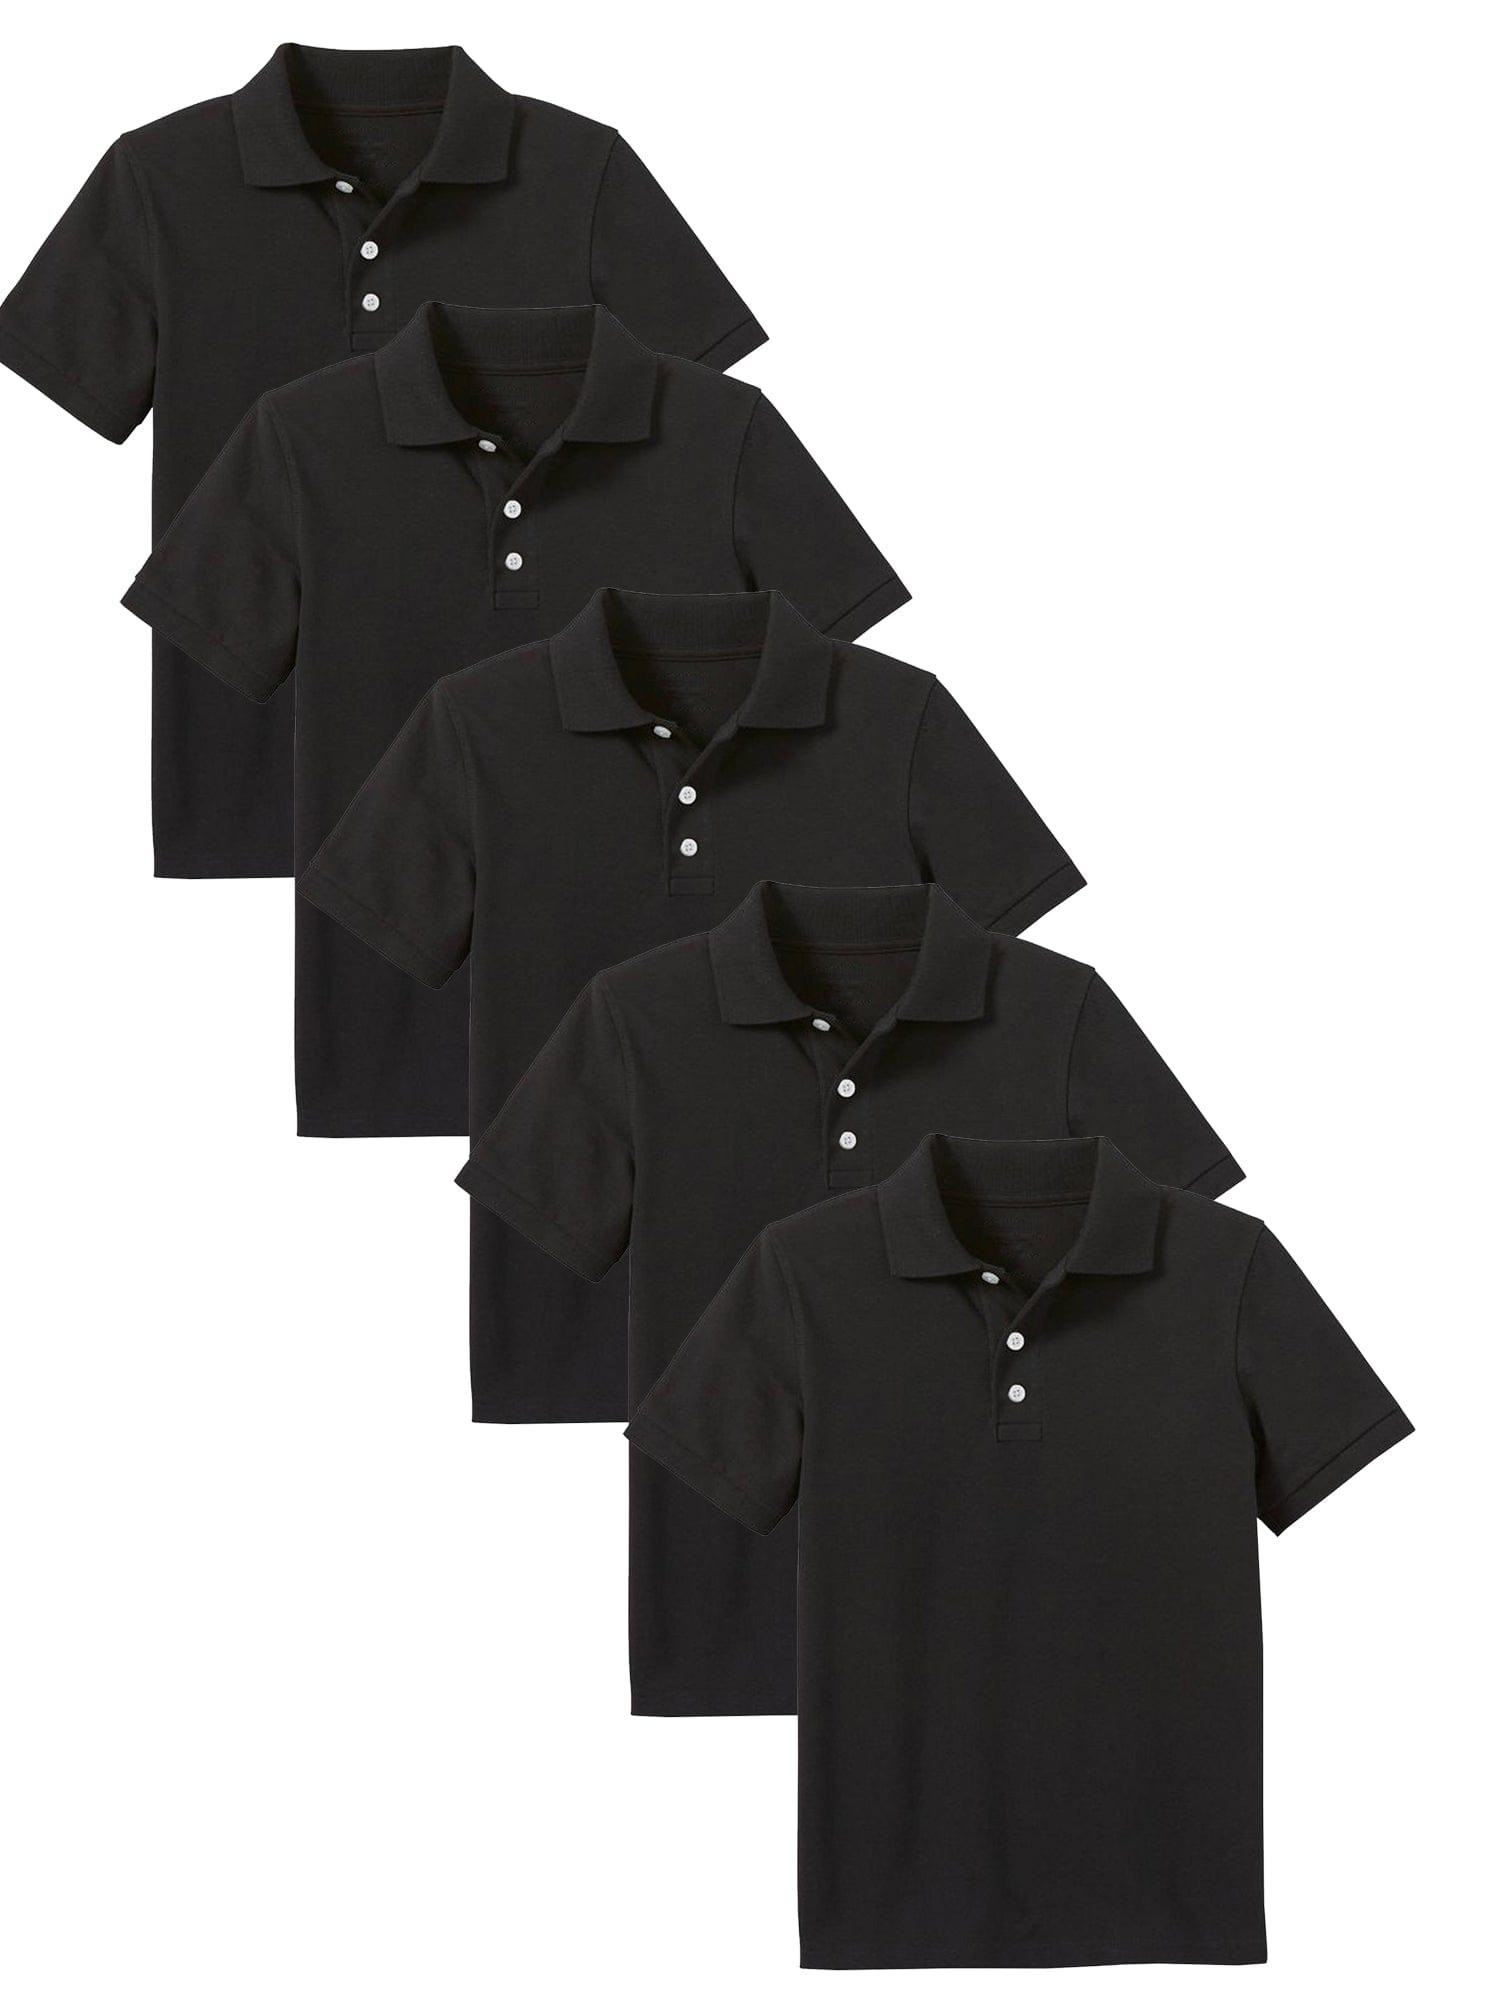 Young Boy's (5-PACK) Short Sleeve Polo Shirt (Sizes 4-7) - GalaxybyHarvic